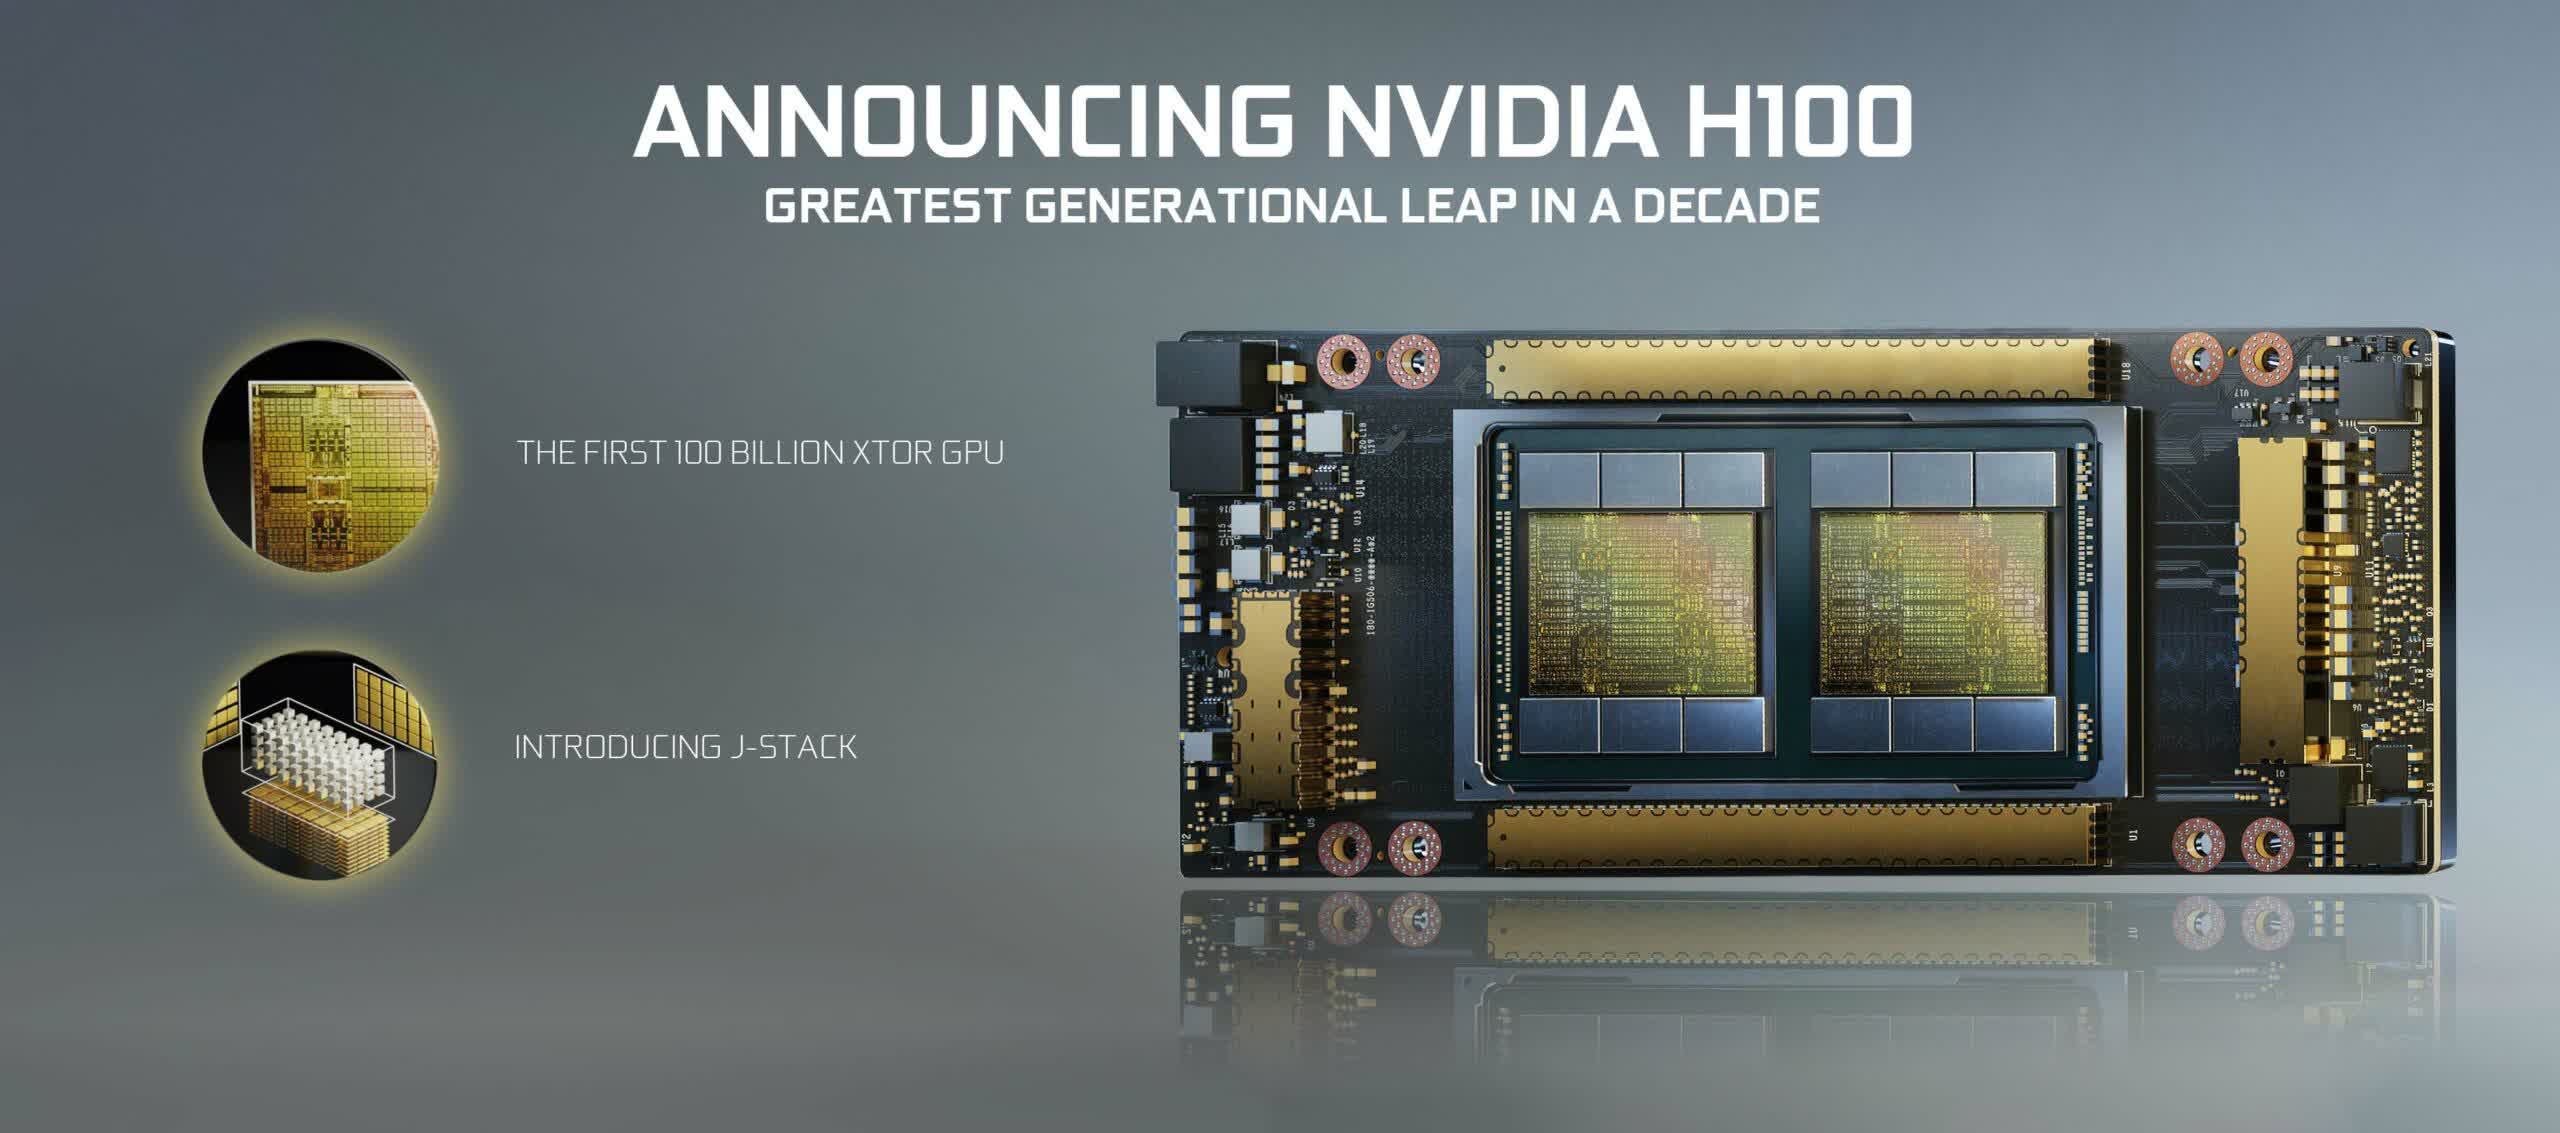 Nvidia: Data Center Growth But Gaming